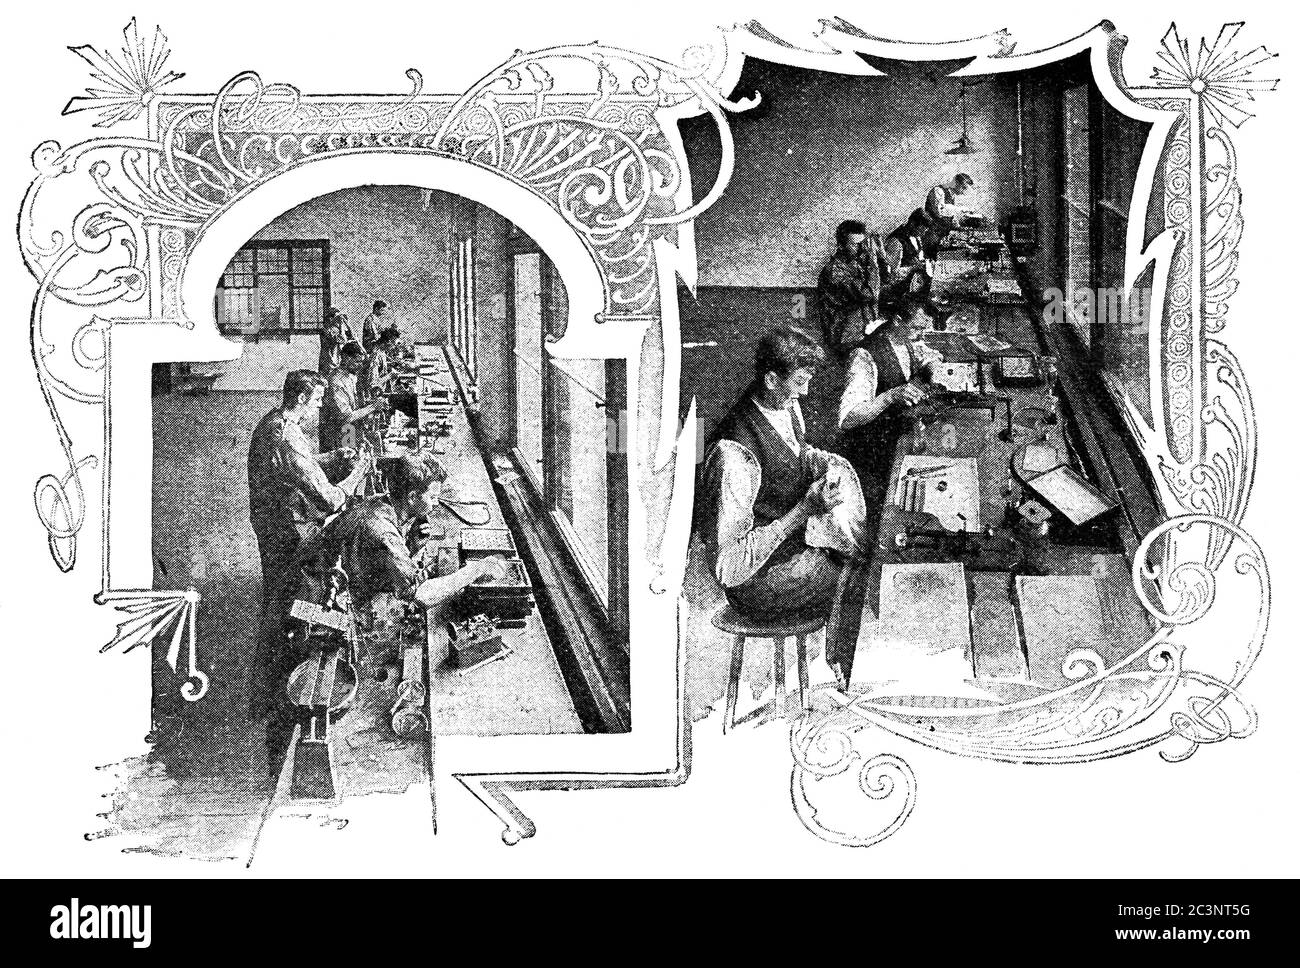 Fine lens grinding and centering workshop, C. P. Goerz. Illustration of the 19th century. White background. Stock Photo